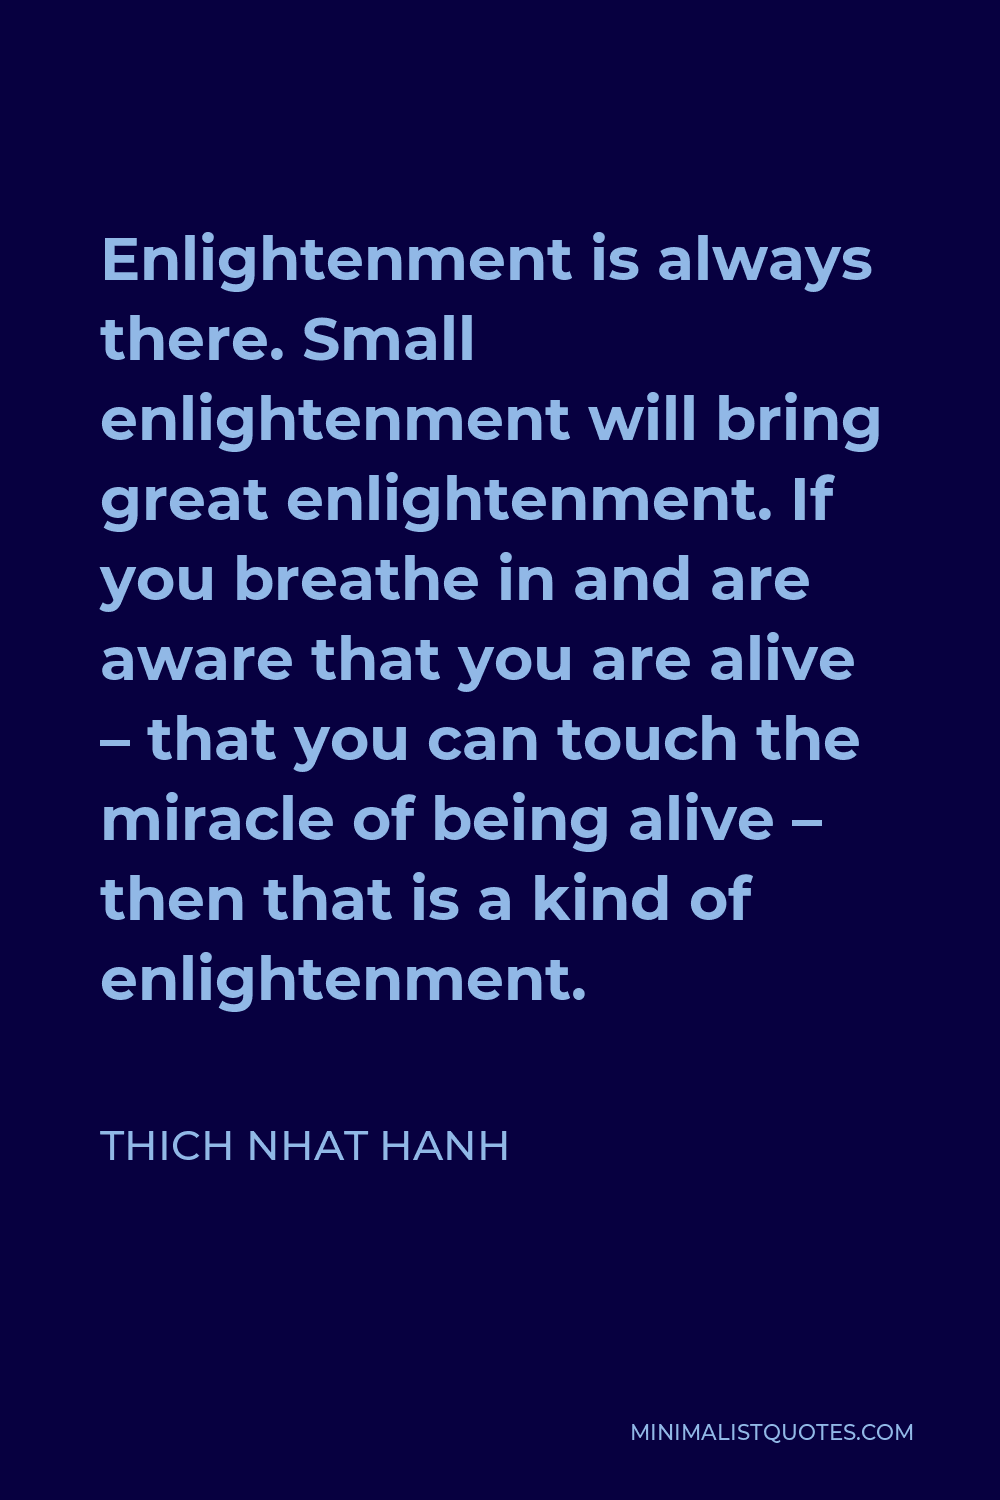 Thich Nhat Hanh Quote - Enlightenment is always there. Small enlightenment will bring great enlightenment. If you breathe in and are aware that you are alive – that you can touch the miracle of being alive – then that is a kind of enlightenment.